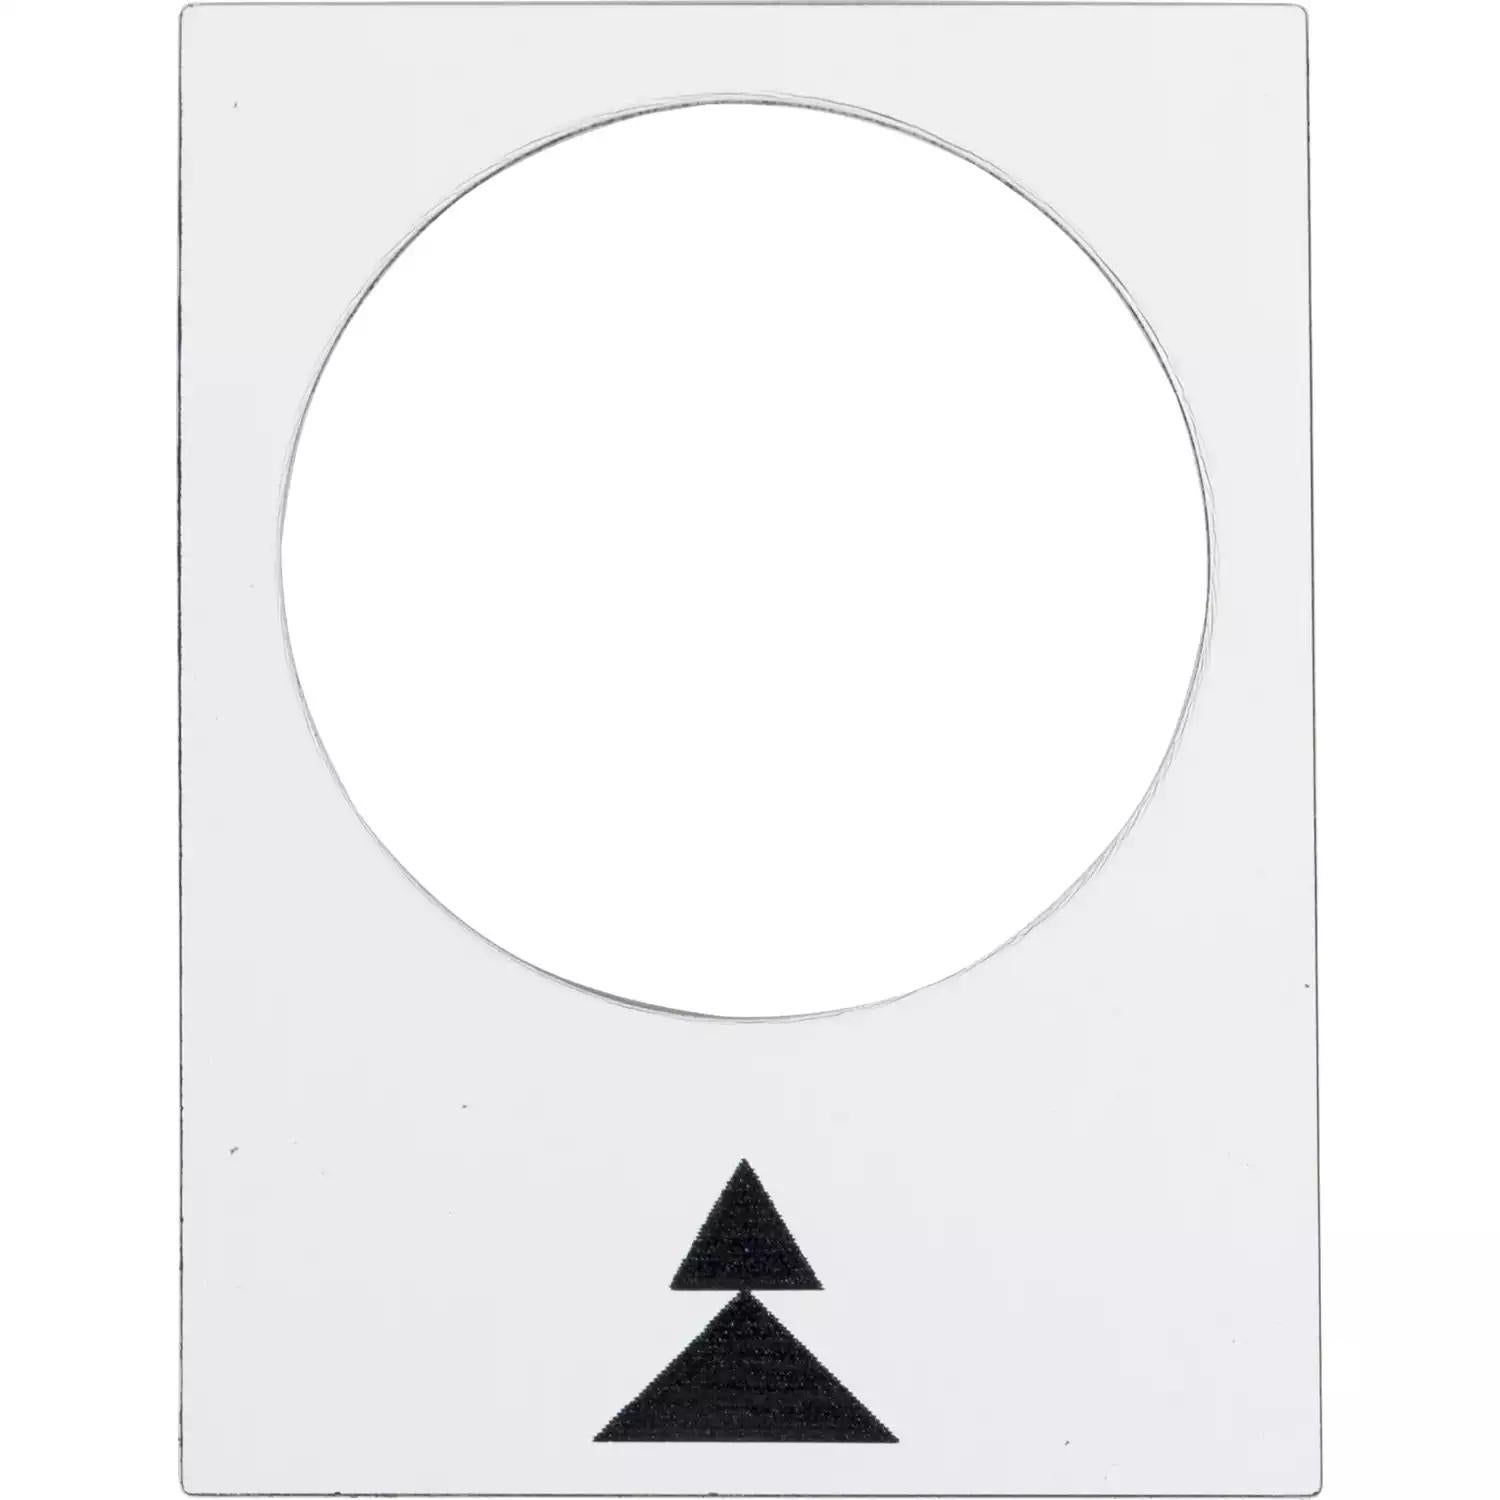 Marked legend, Harmony XAC, nameplate, 30 x 40mm, plastic, white, 22mm push button, black marked up double arrowhead